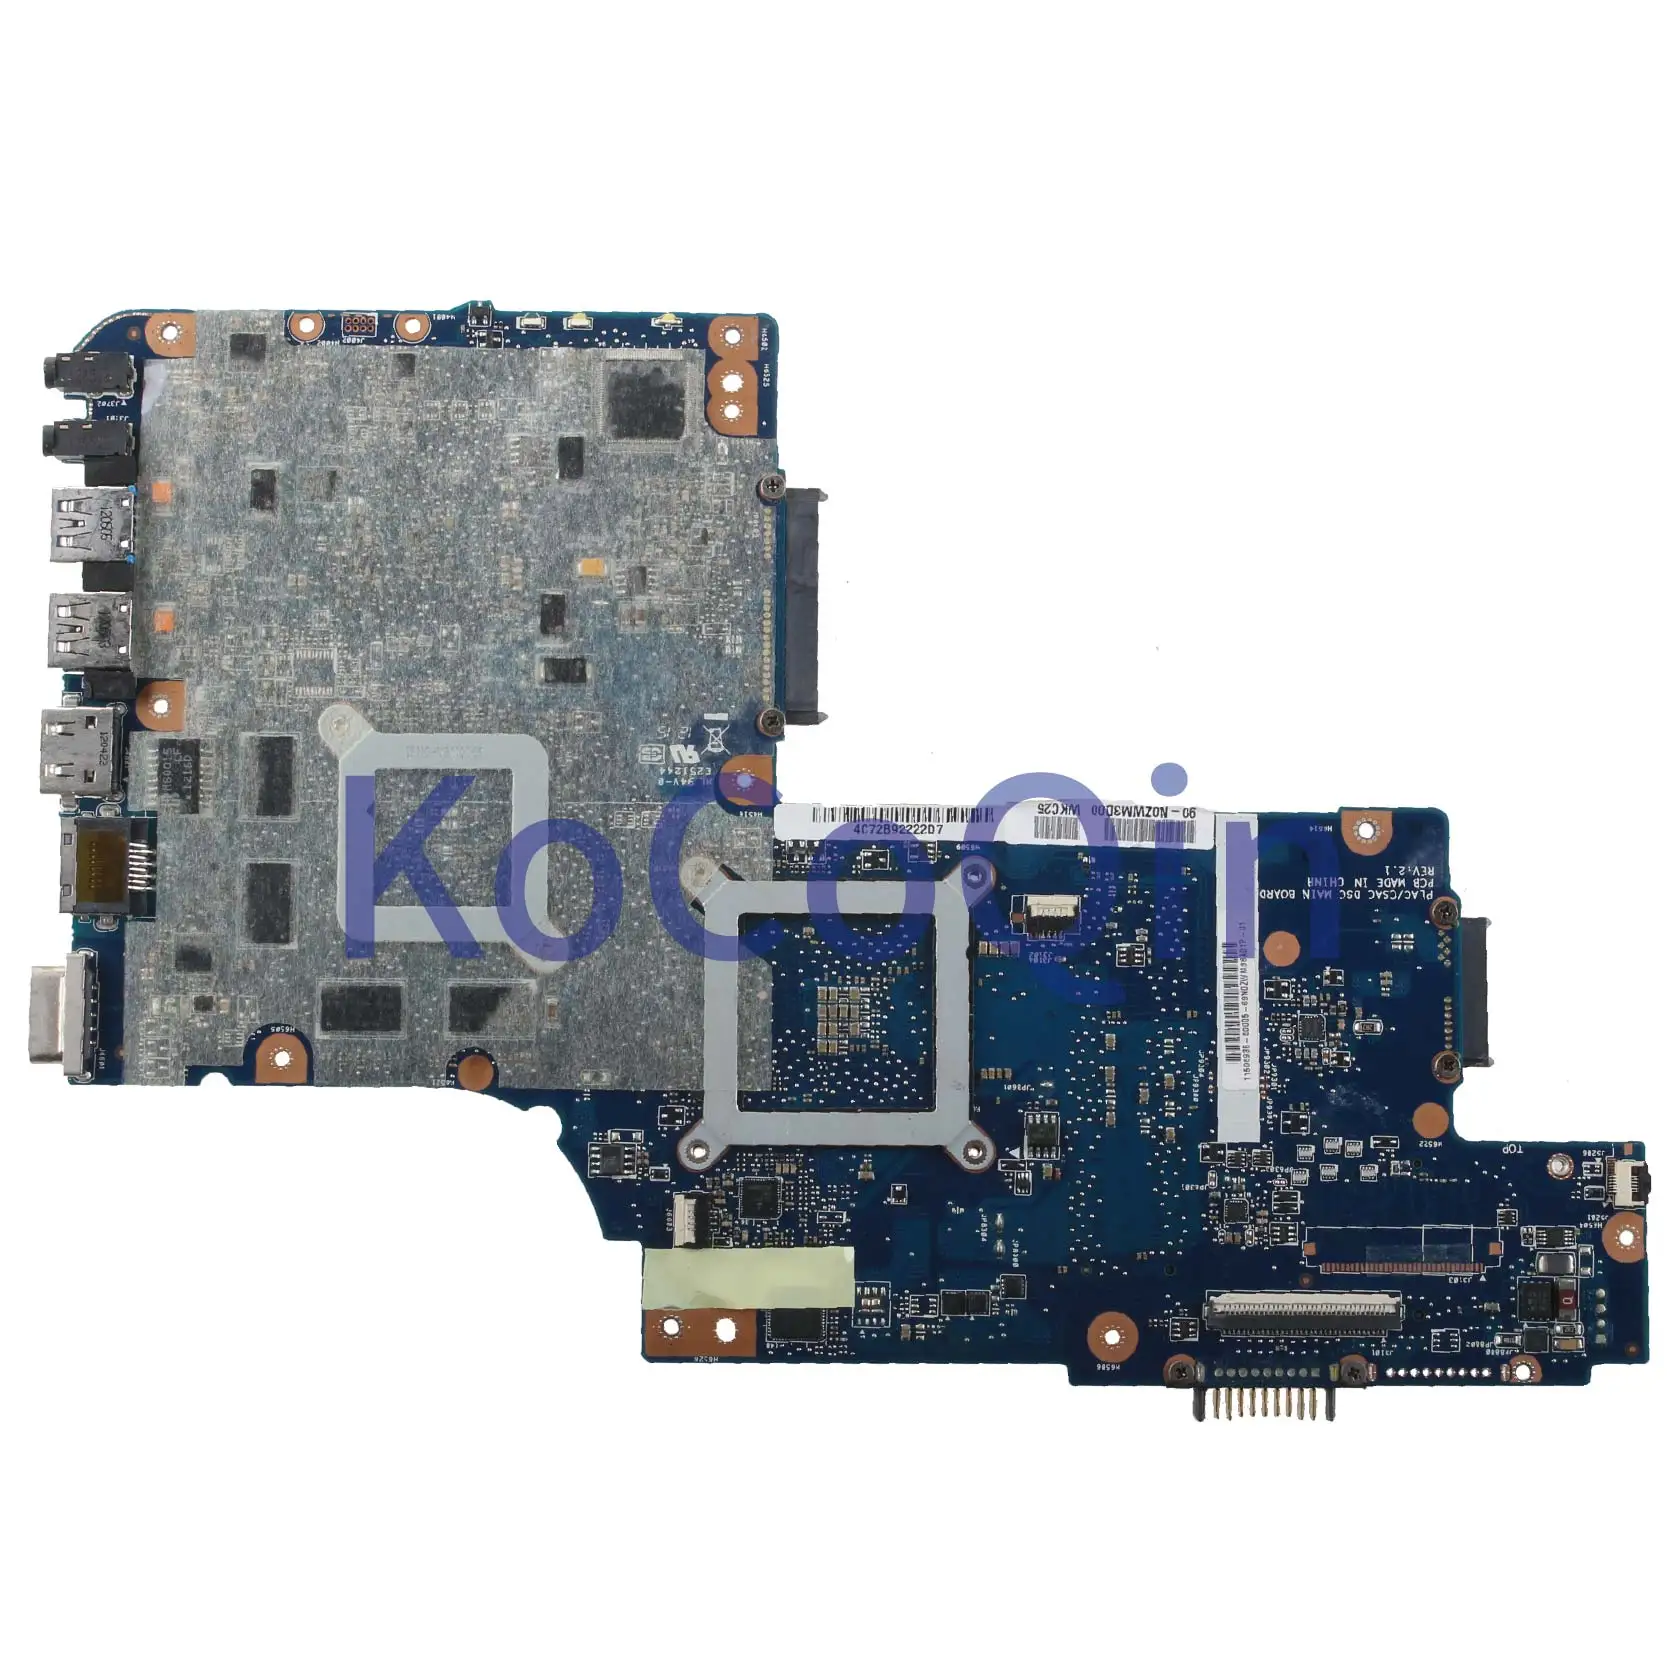 Flash Sale  KoCoQin Laptop motherboard For TOSHIBA Satellite C850D C855D Mainboard 216-0810028